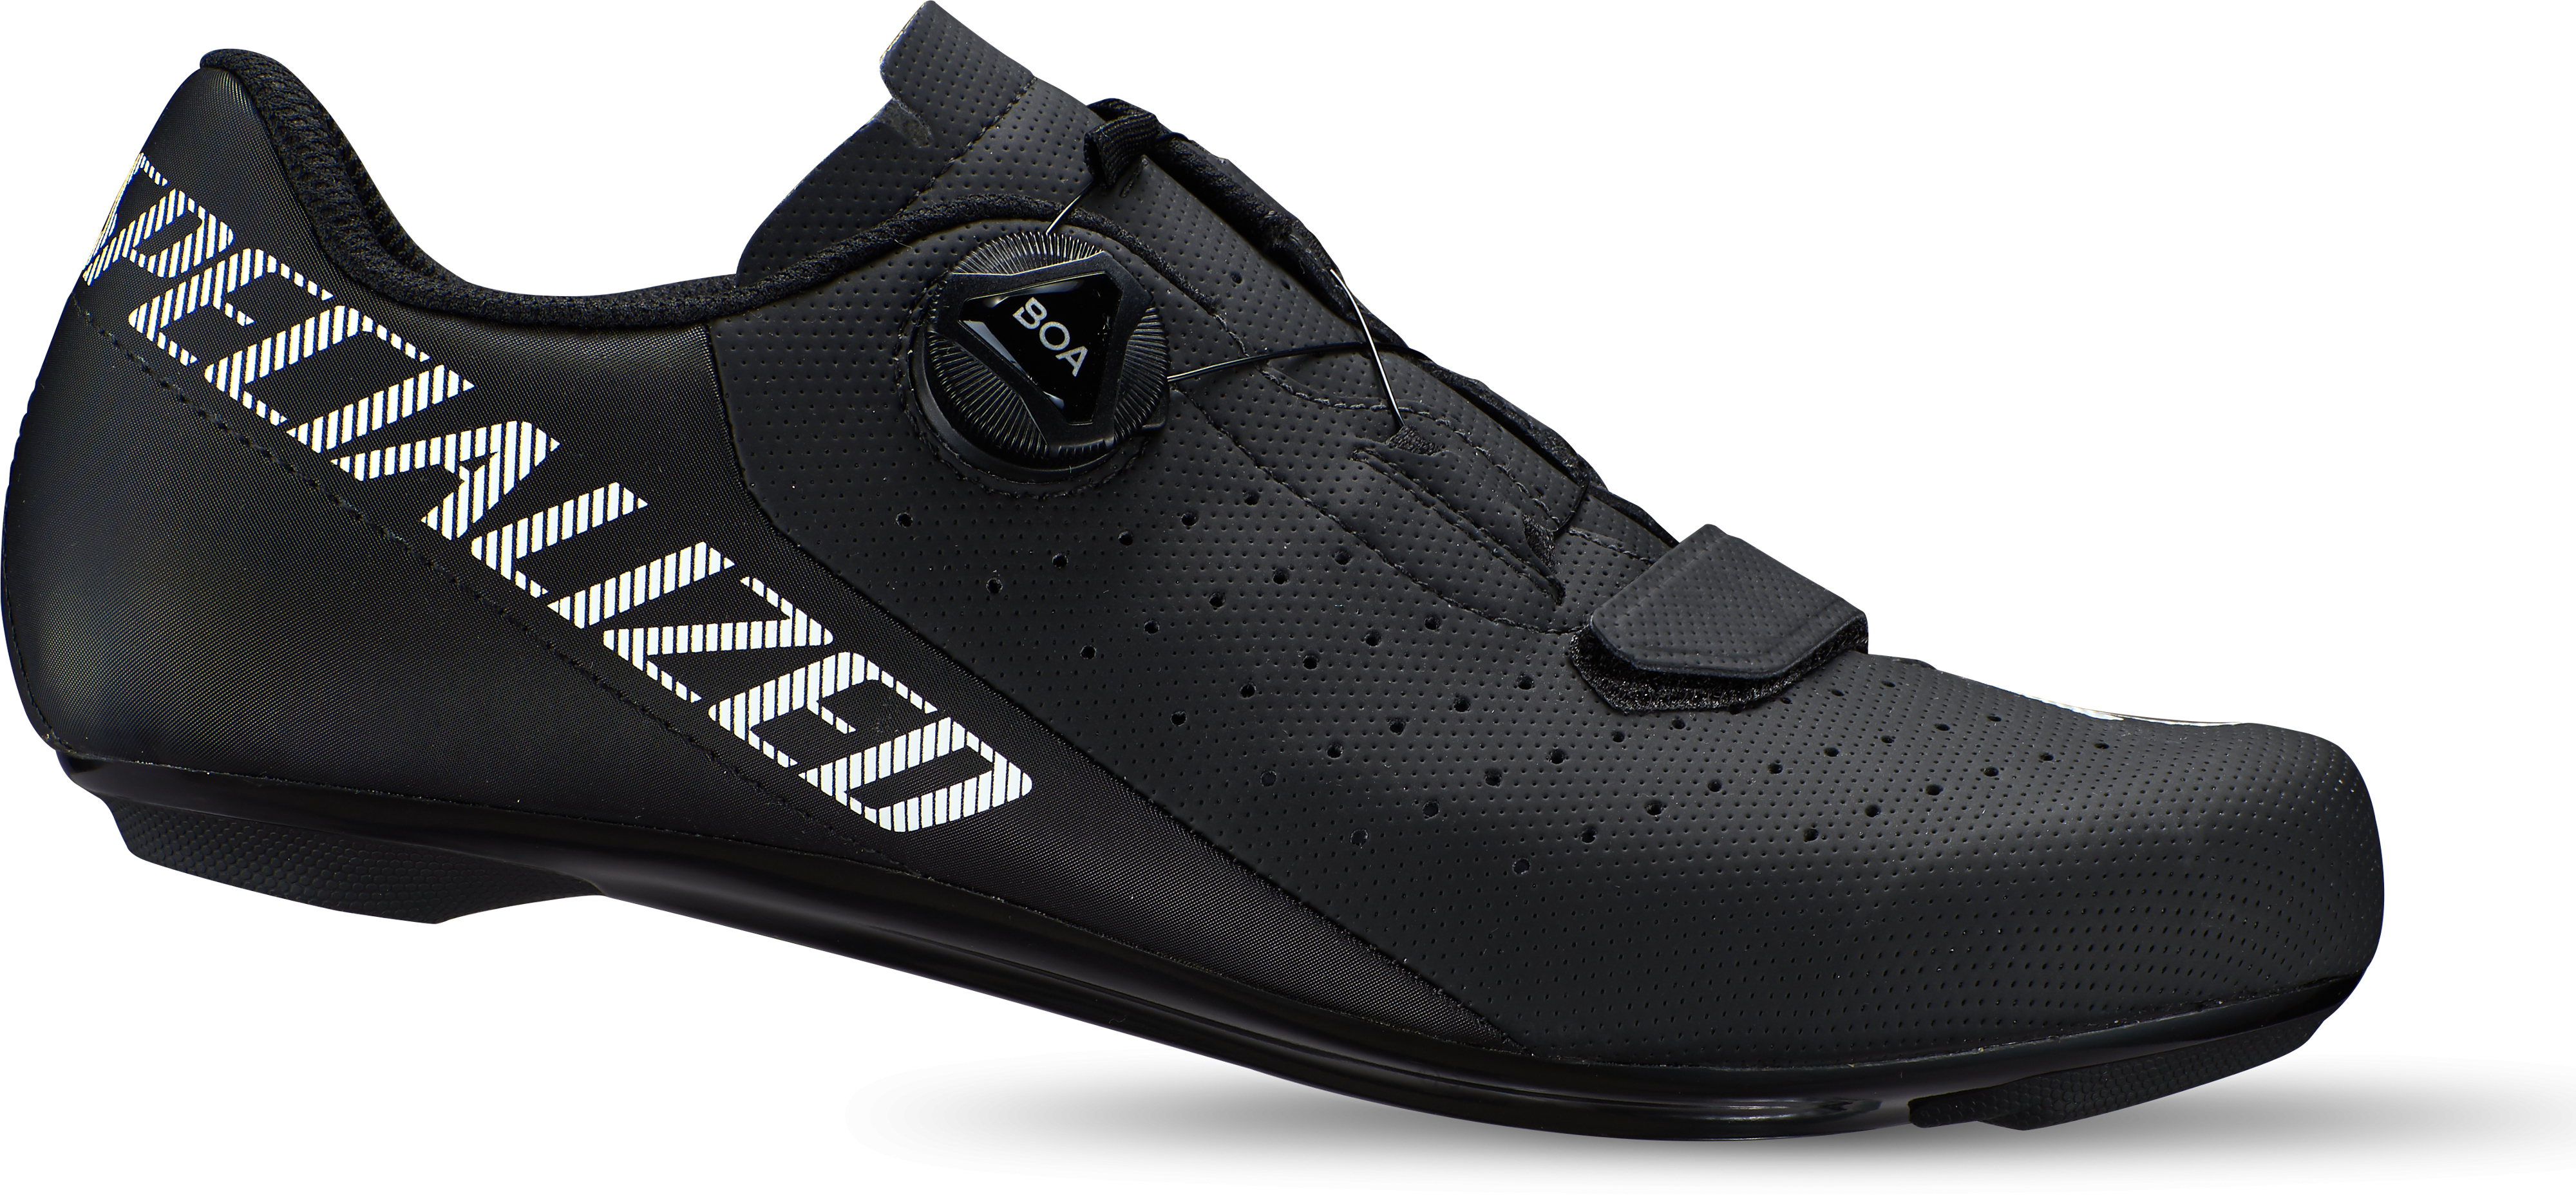 Specialized  Torch 1.0 Road Cycling Shoes  39 Black